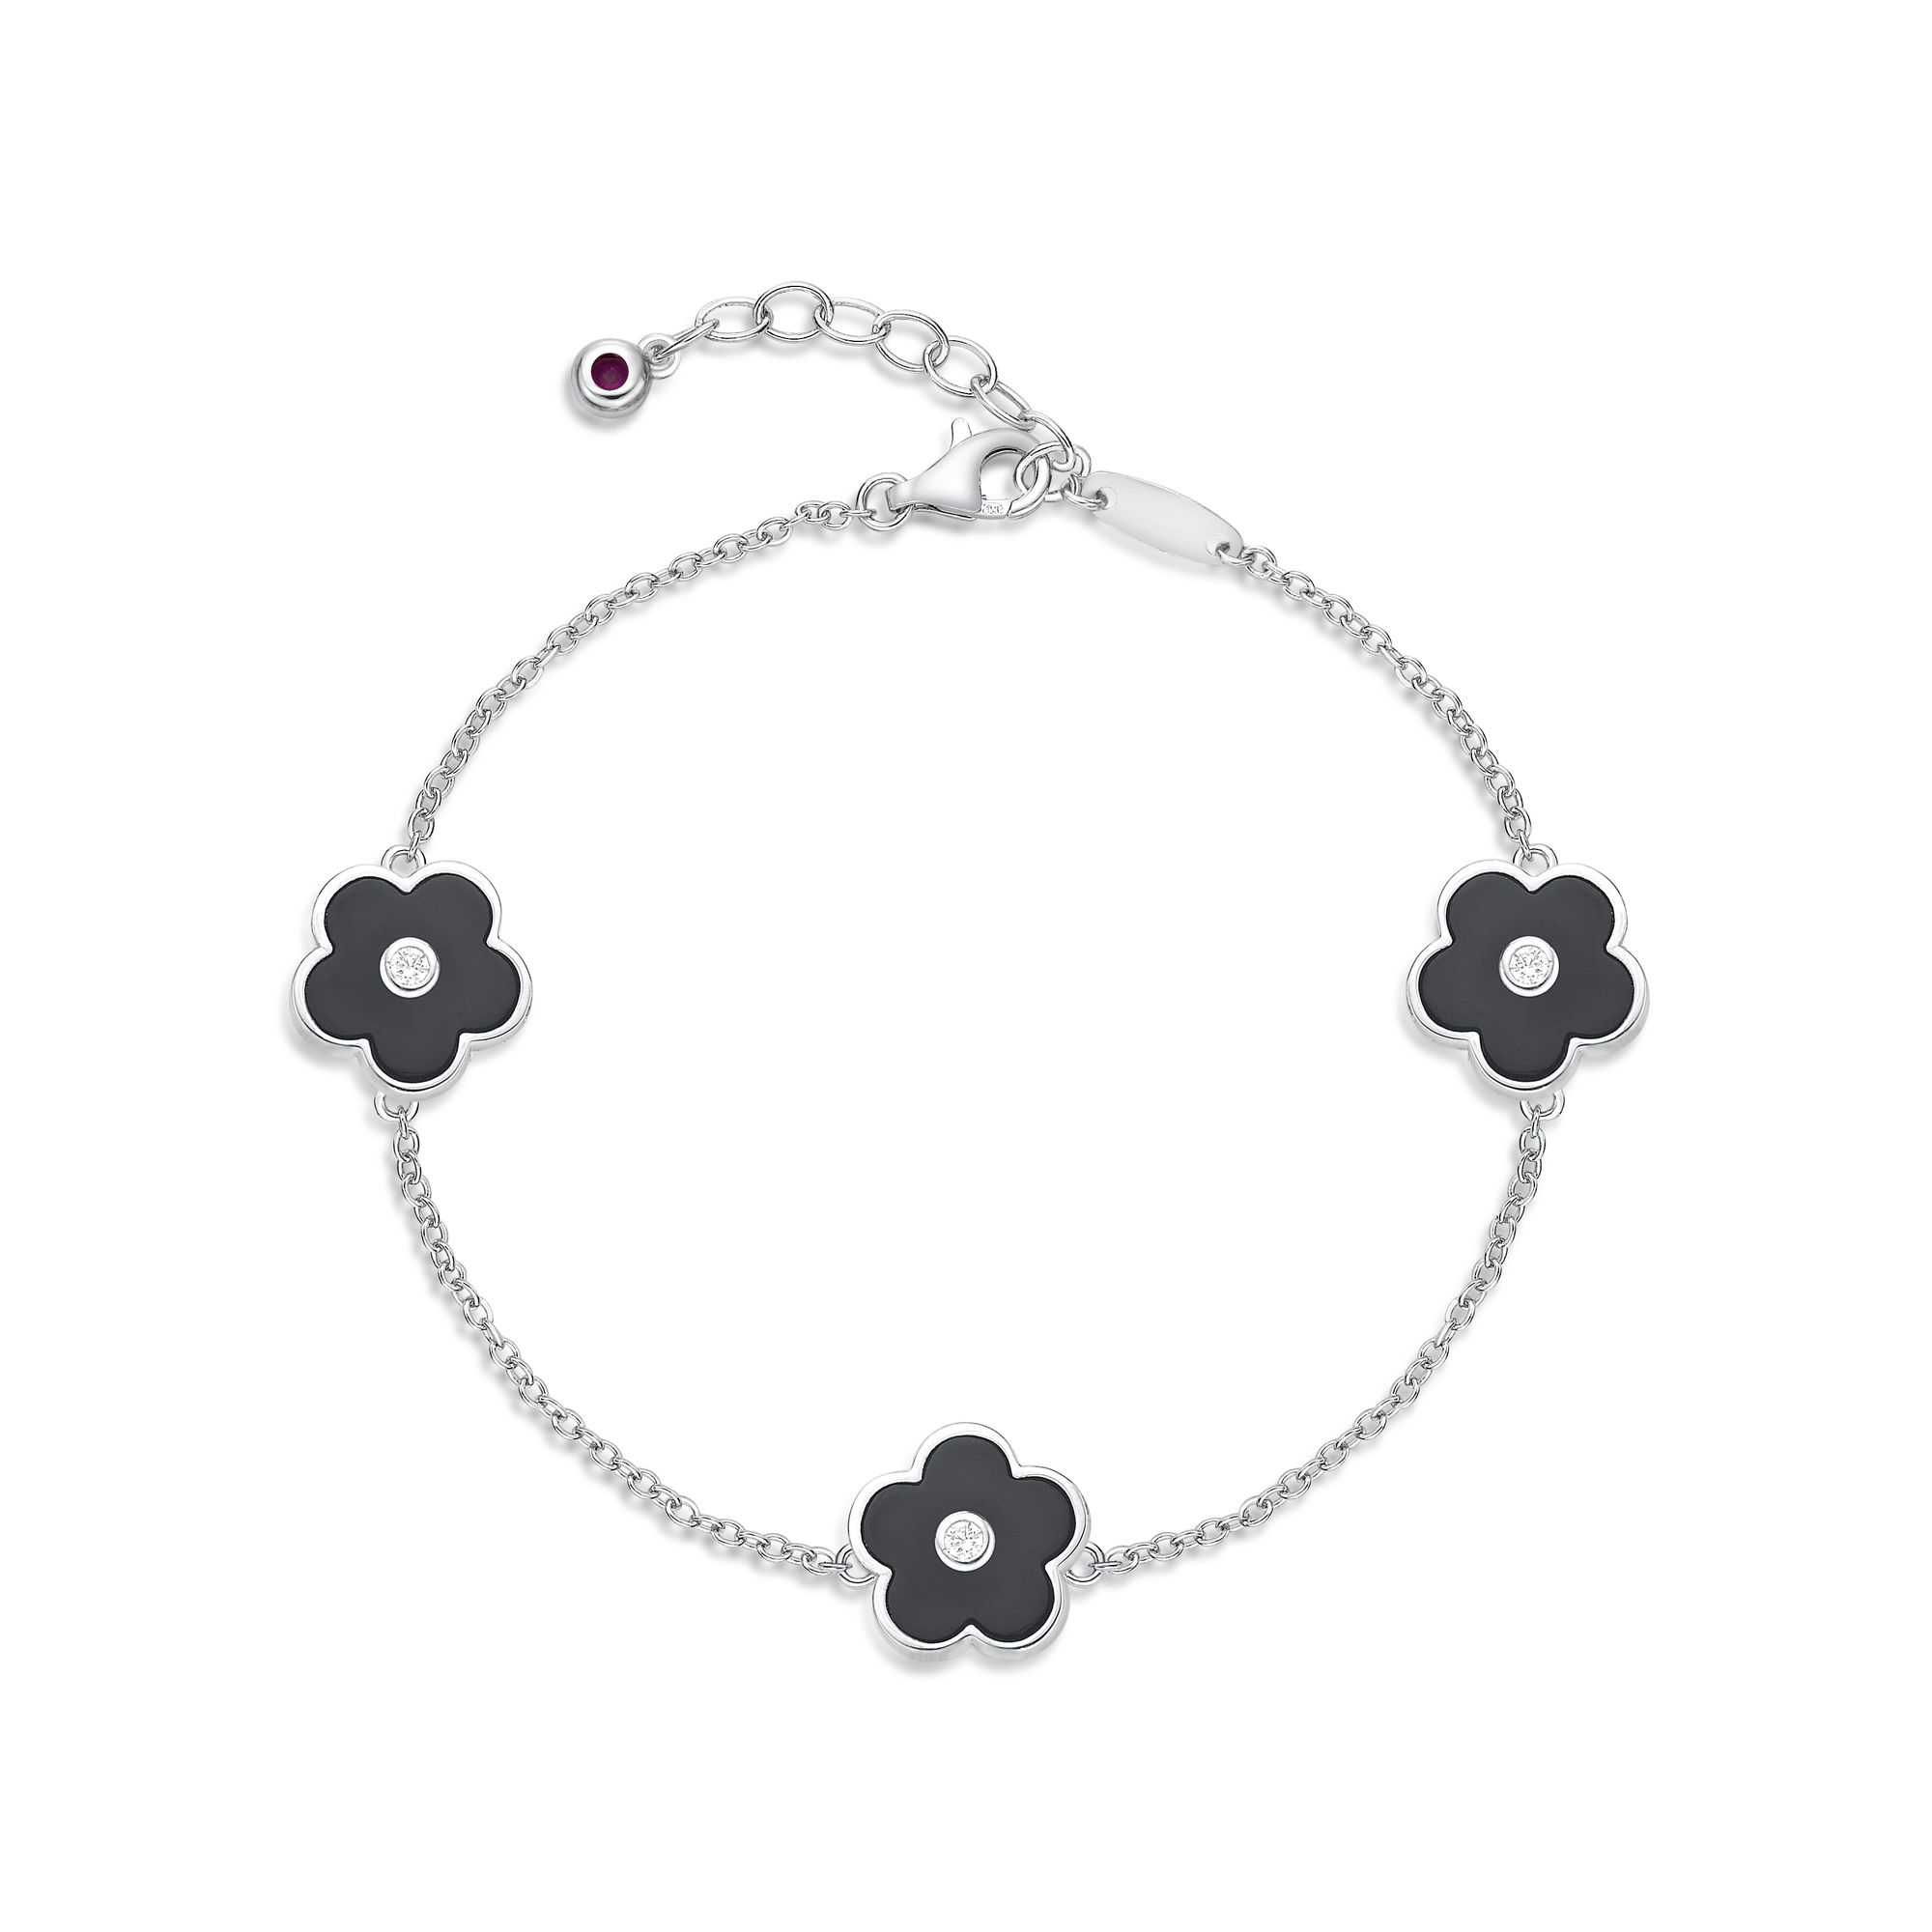 Women's Black Onyx Triple Flower Bracelet in 925 Sterling Silver with Cubic Zirconia - 7-8 Inch Adjustable Cable Chain - Flora | Lavari Jewelers